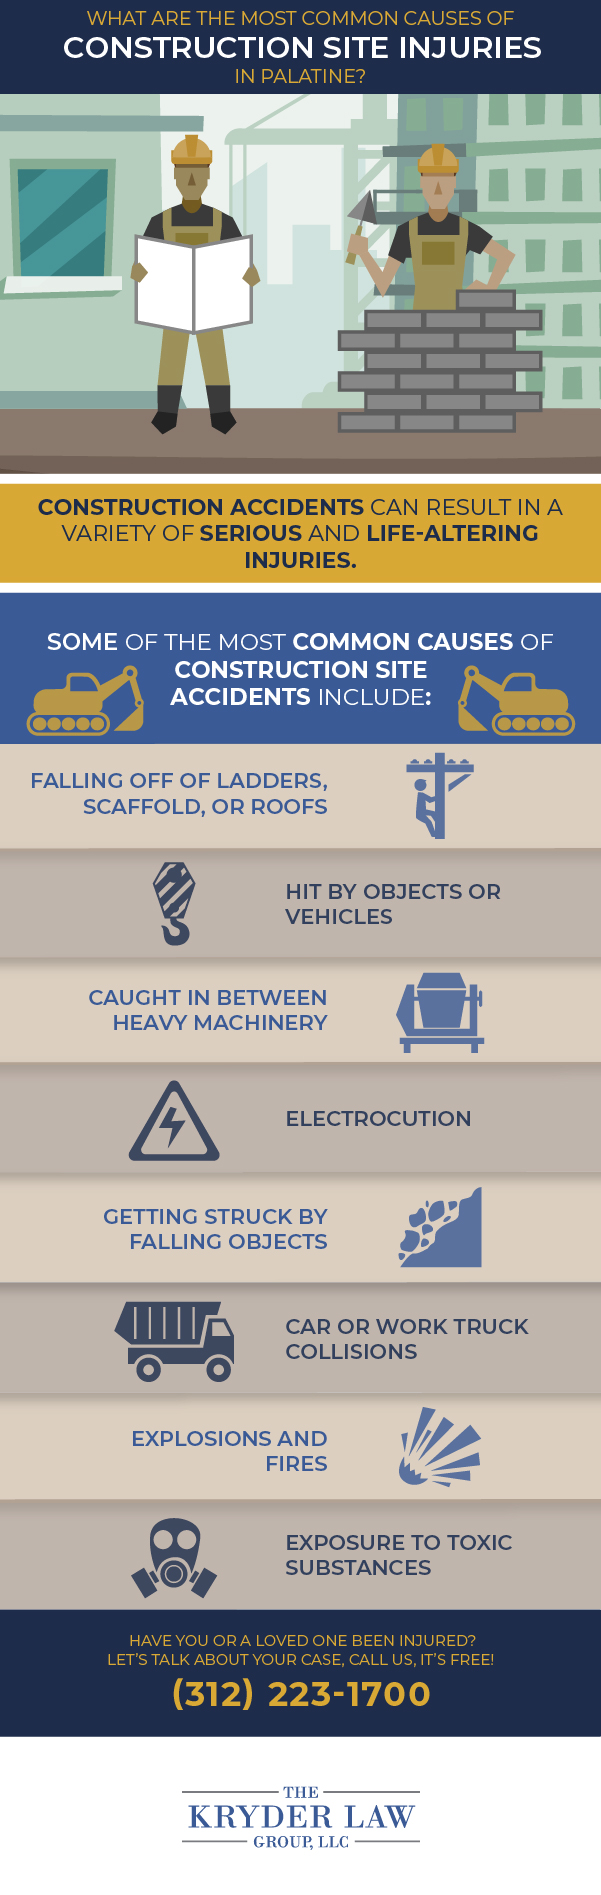 What Are The Most Common Causes of Construction Site Injuries in Palatine?